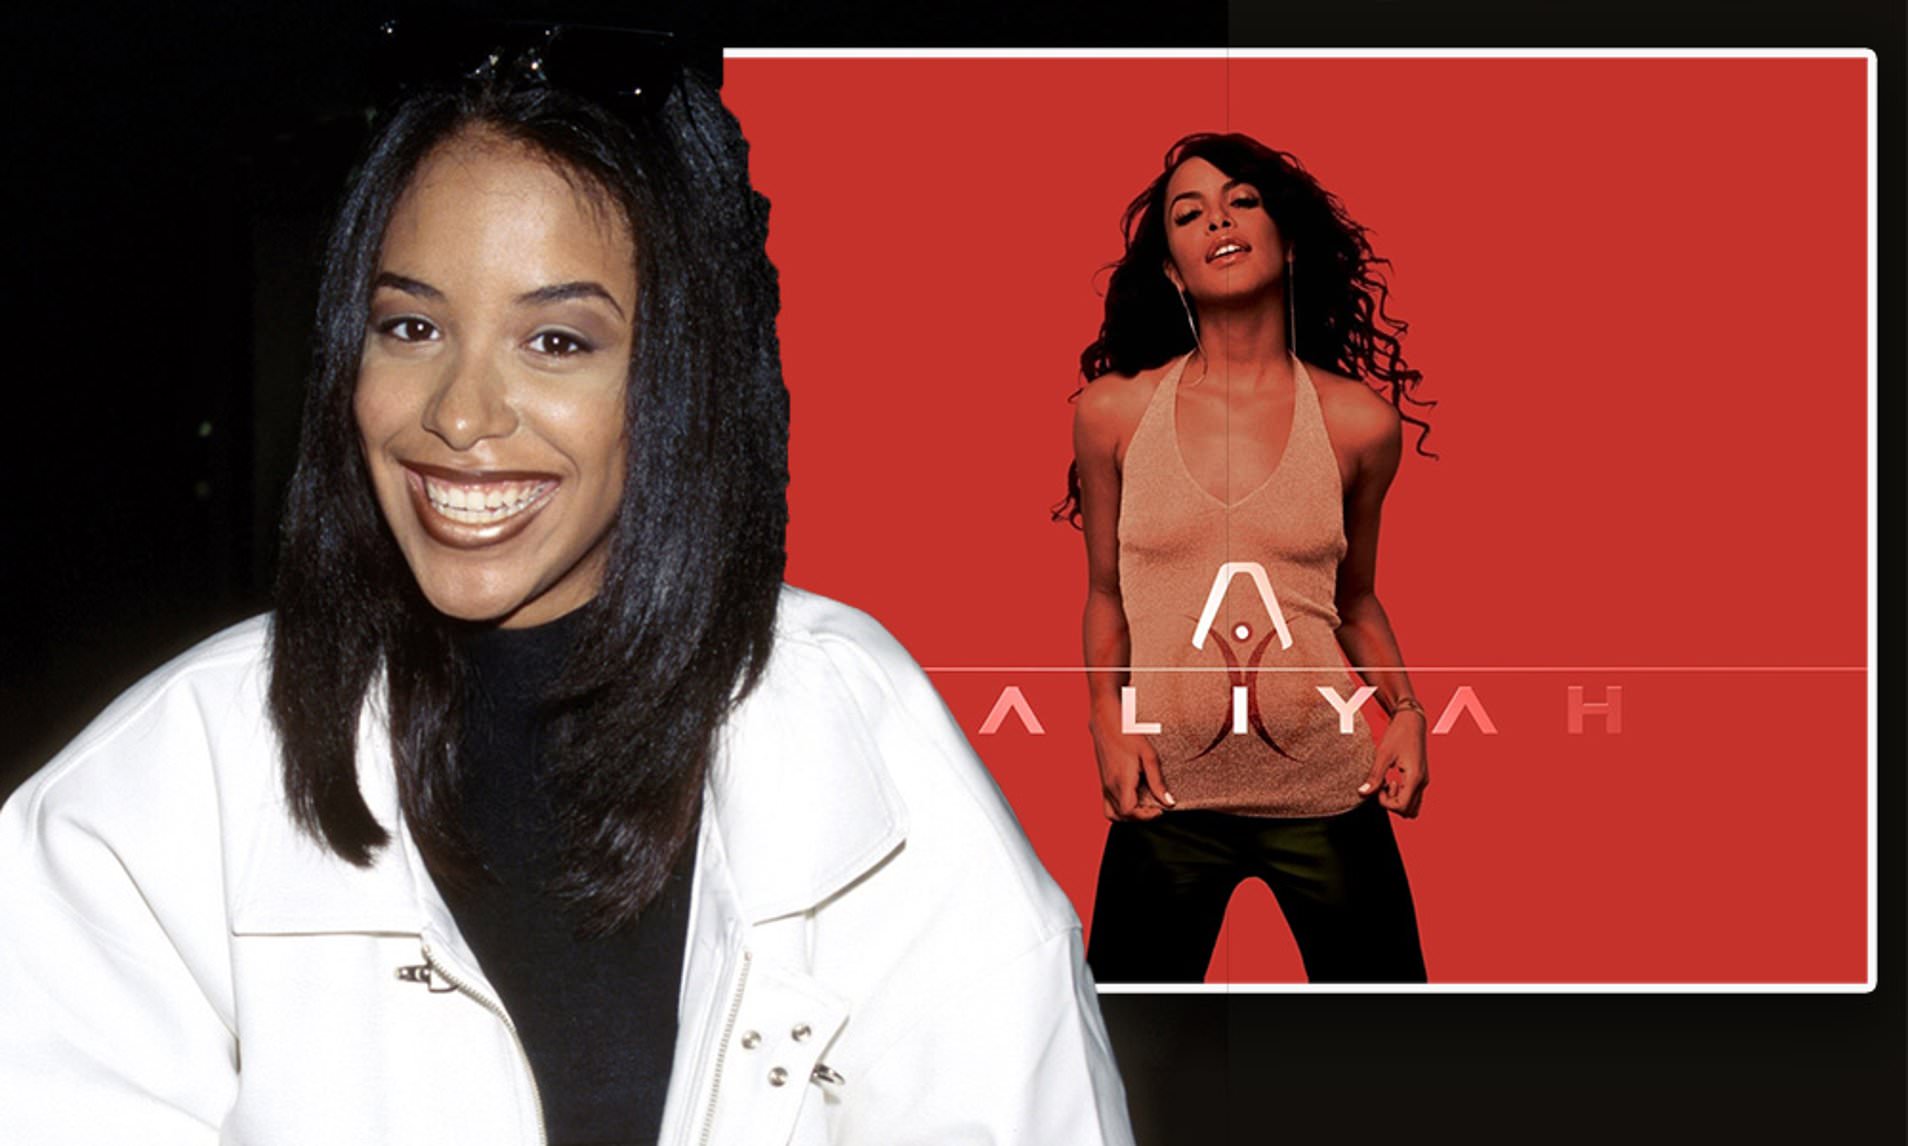 Aaliyah’s music will finally be available for streaming.